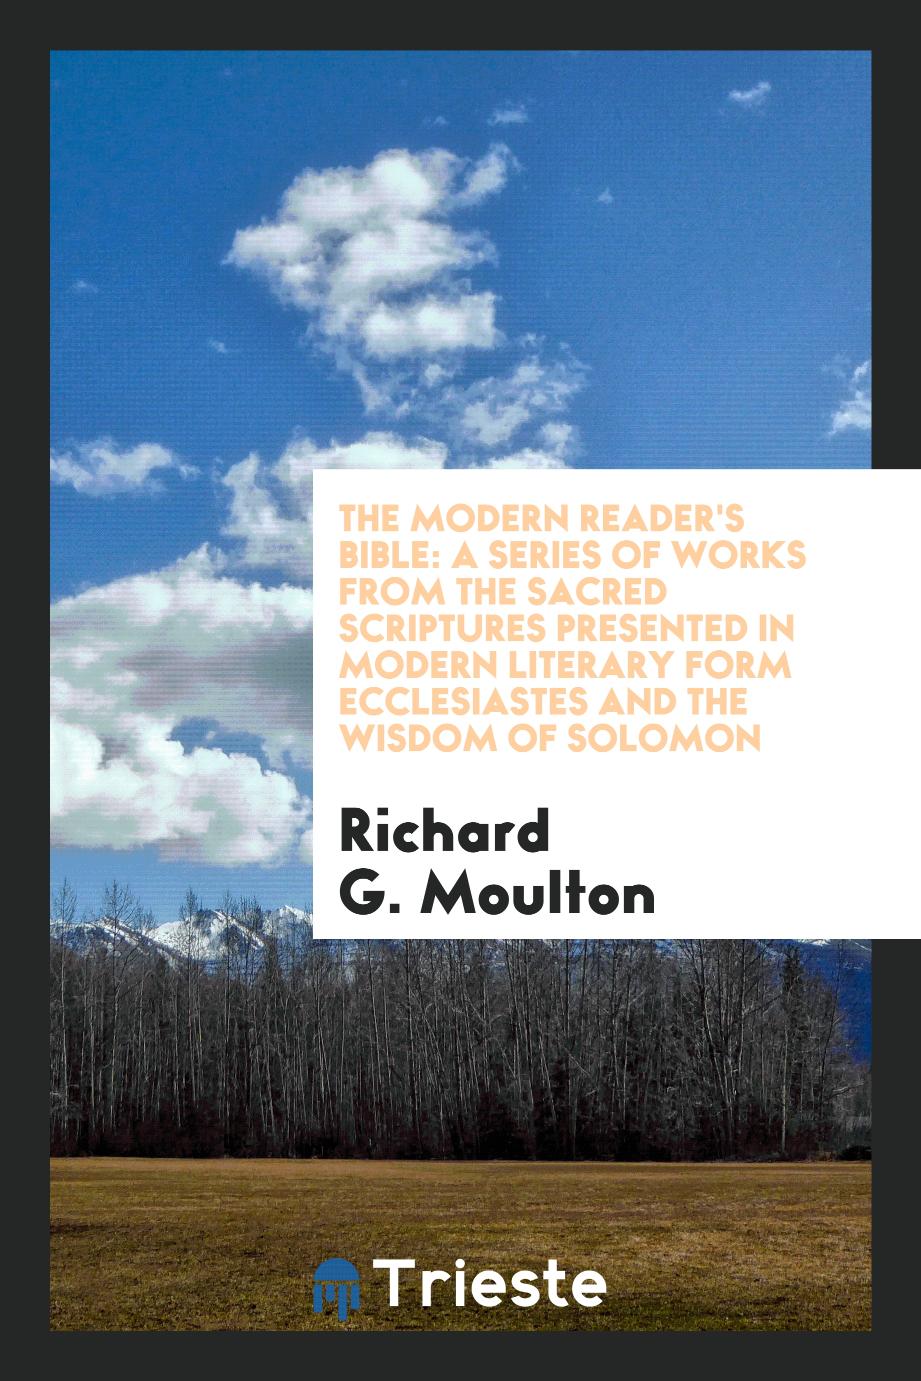 The modern reader's Bible: a series of works from the sacred Scriptures presented in modern literary form Ecclesiastes and the wisdom of Solomon